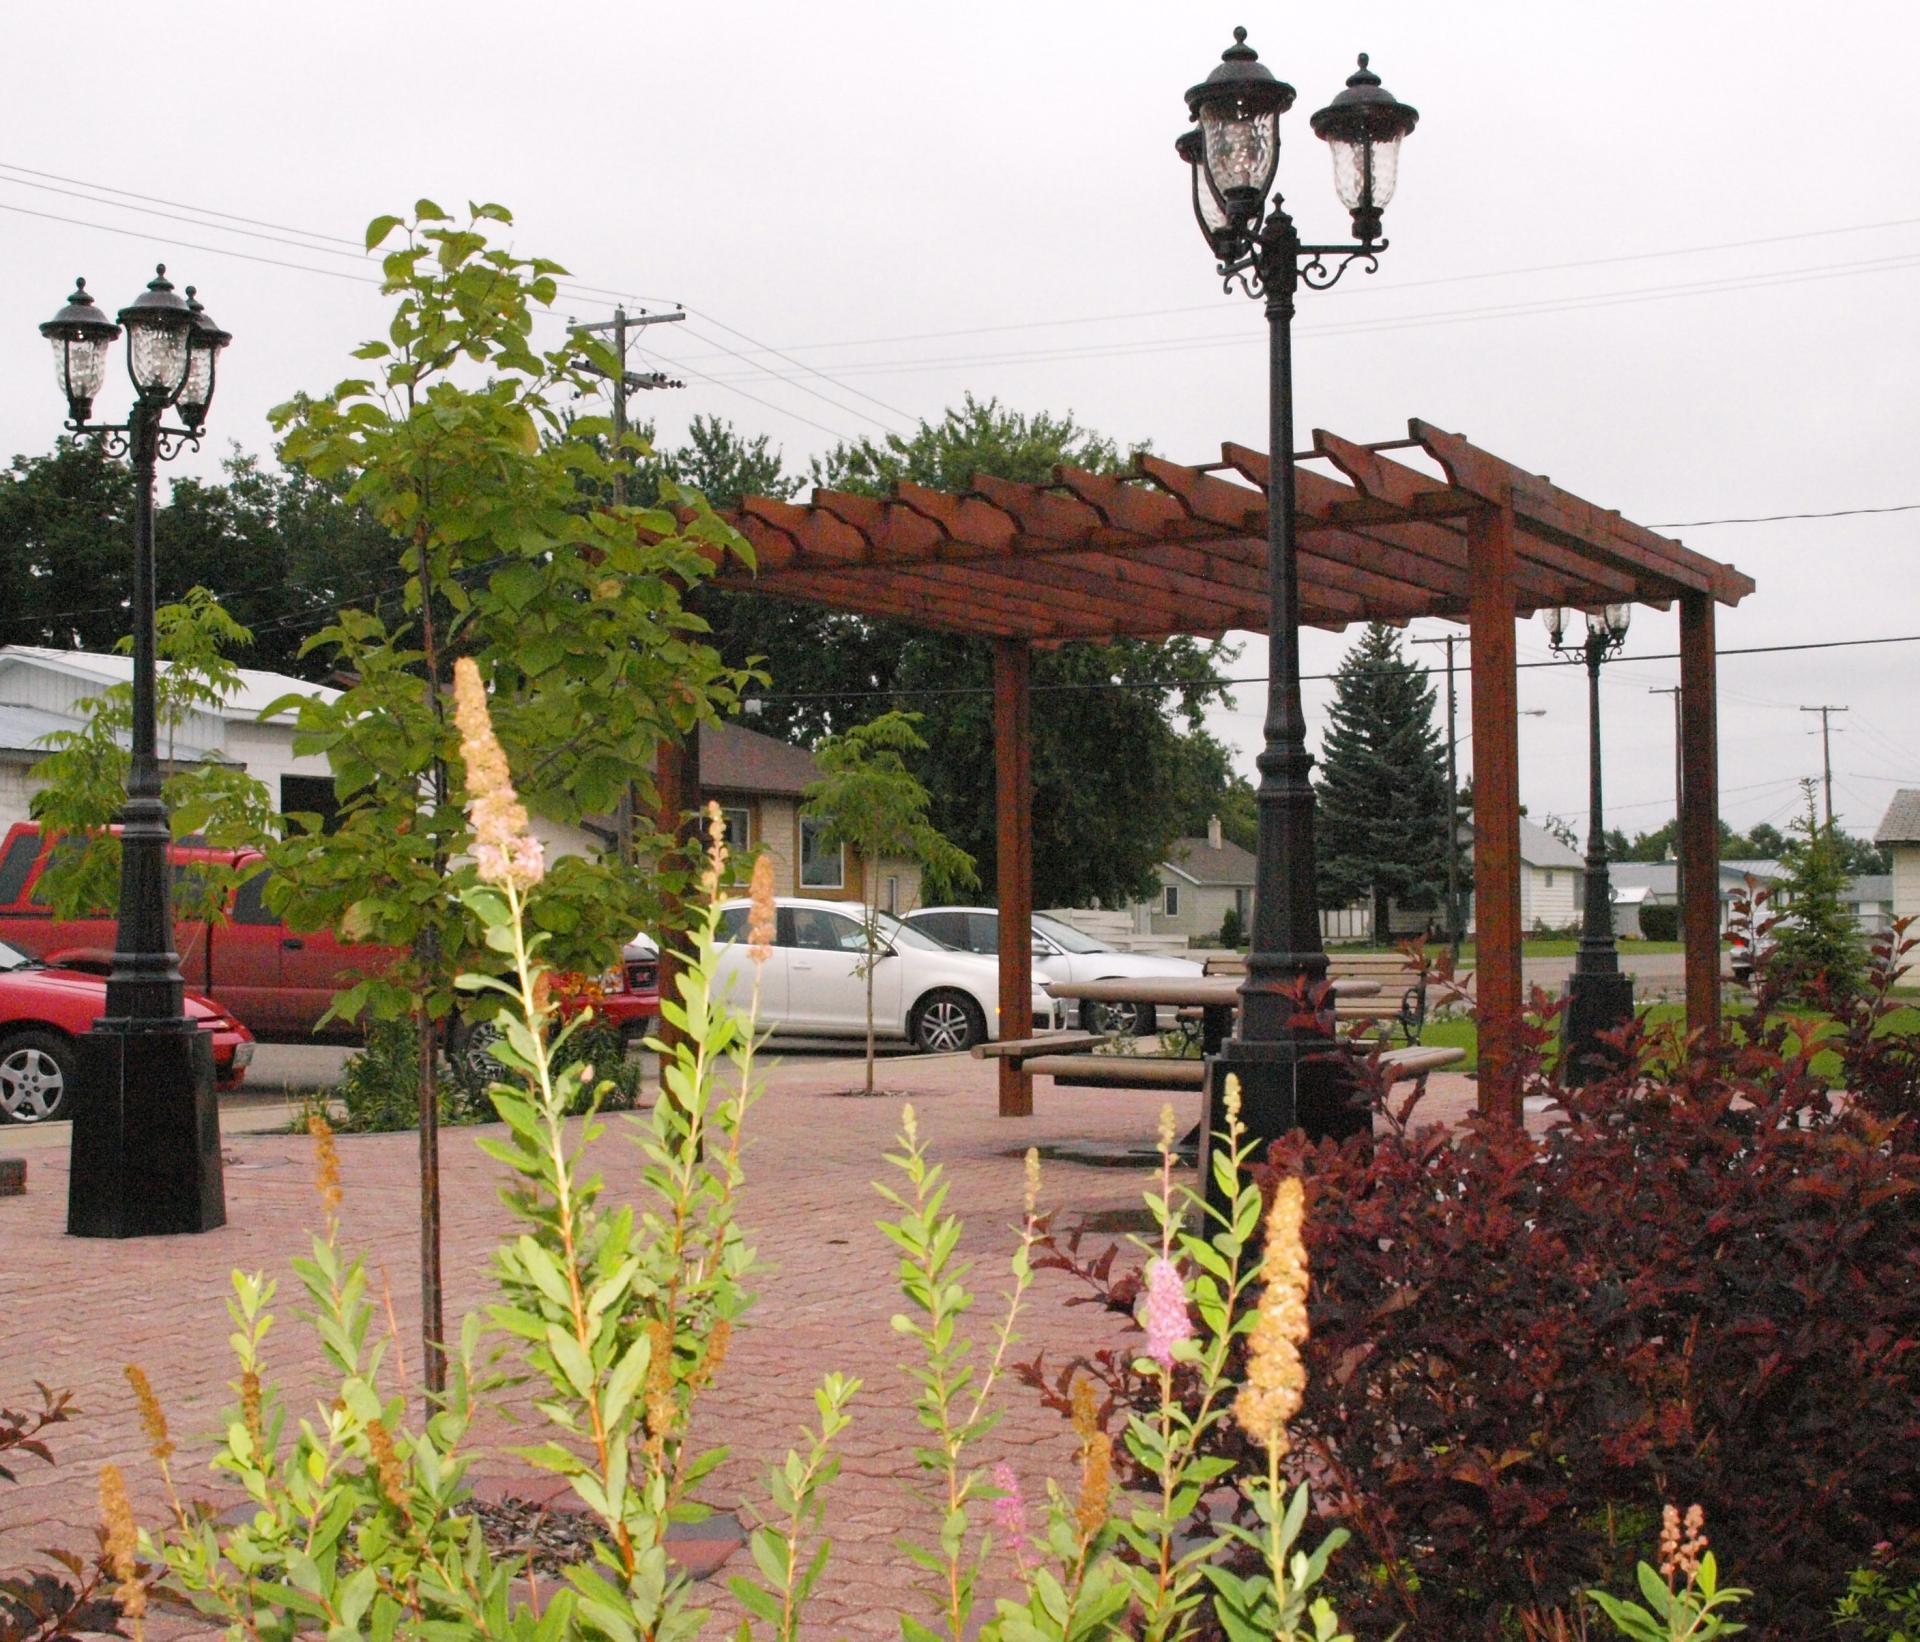 A town square paved with bricks, with a metal pergola and old-fashioned streetlamps and flowers in the foreground.